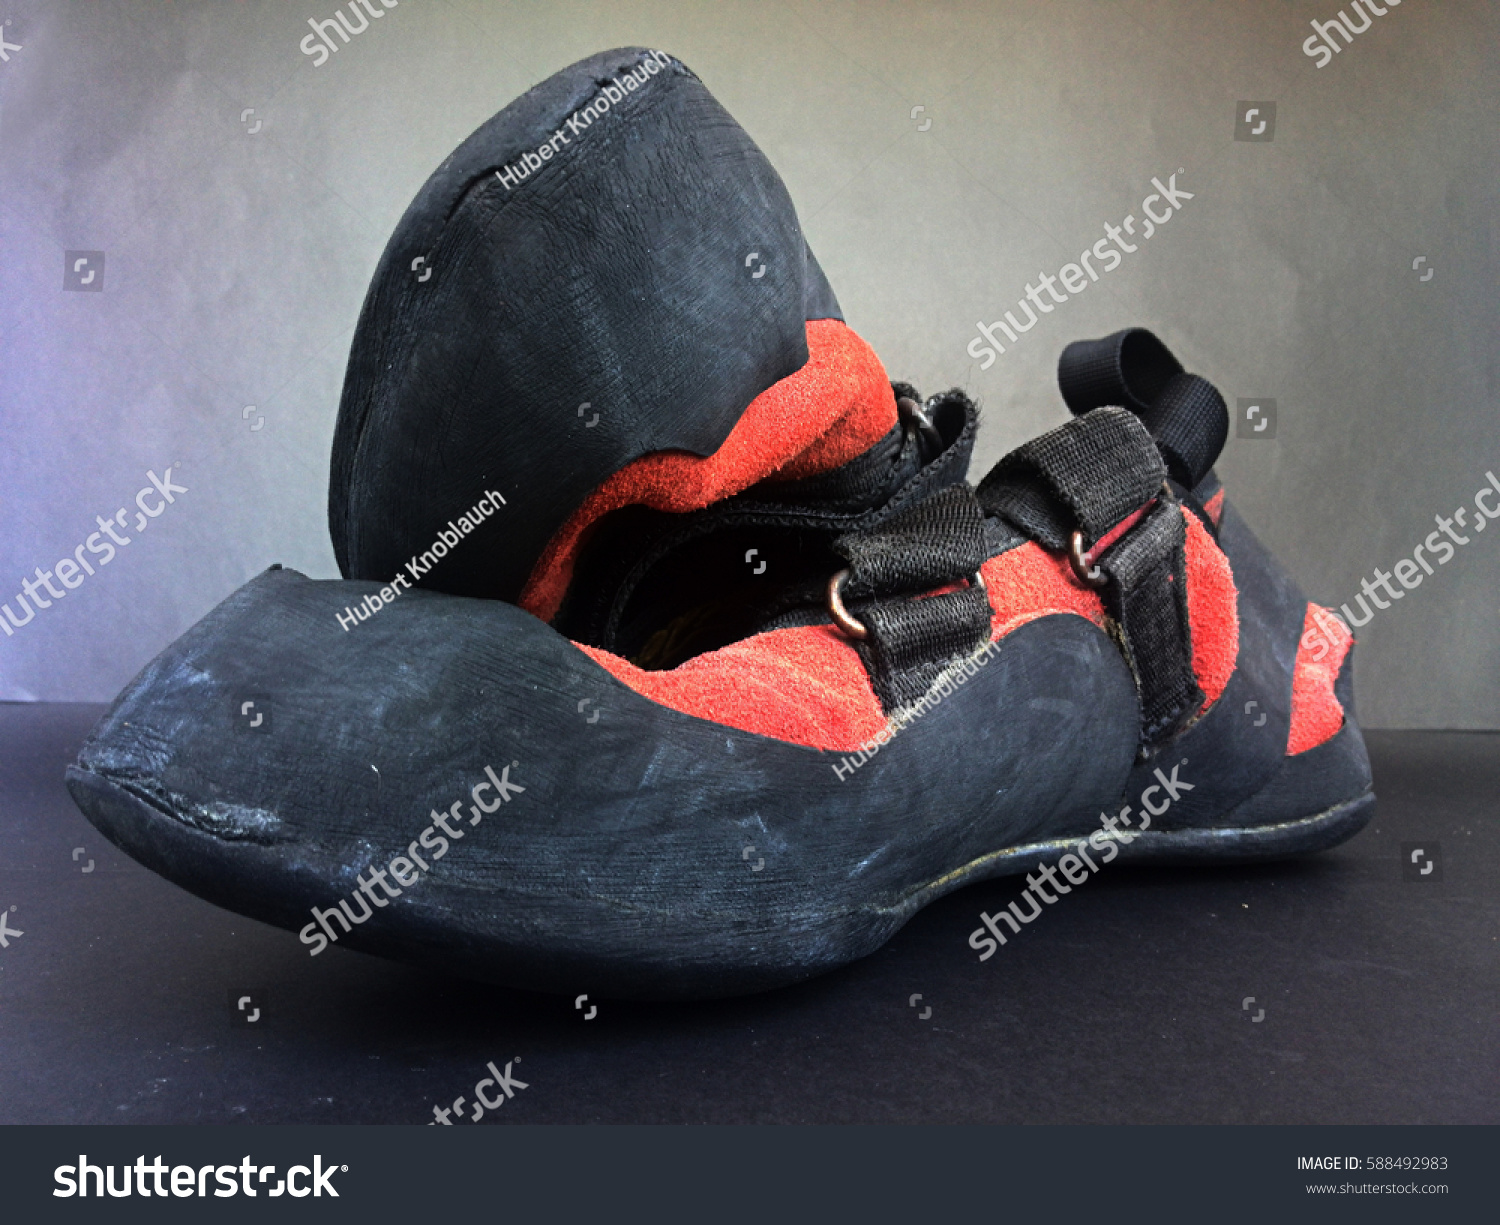 buy used climbing shoes